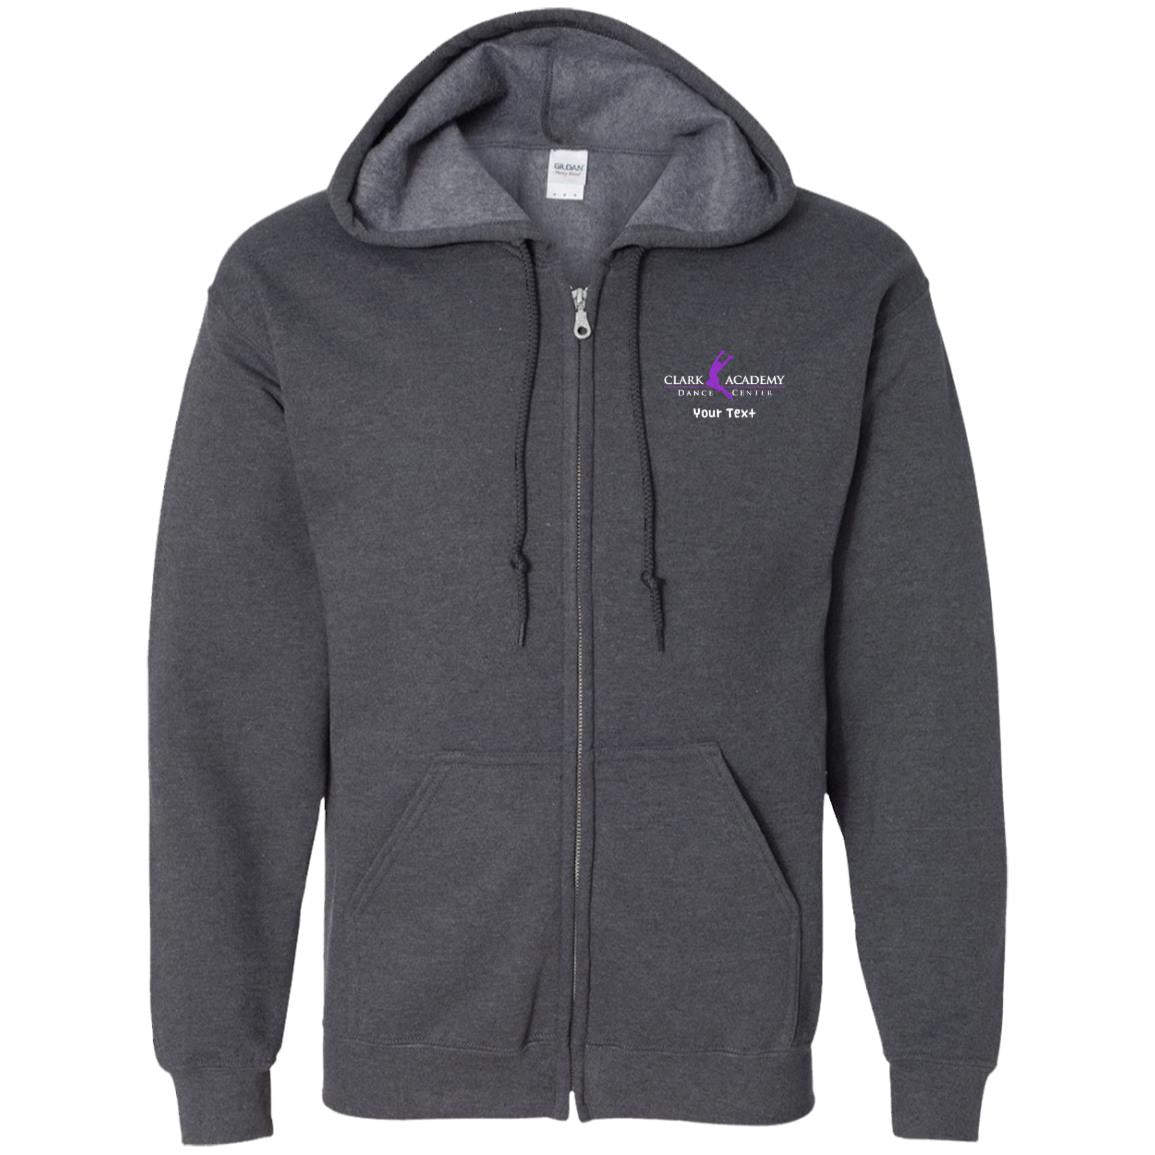 CADC Zip Up Hooded Sweatshirt - With Personalization